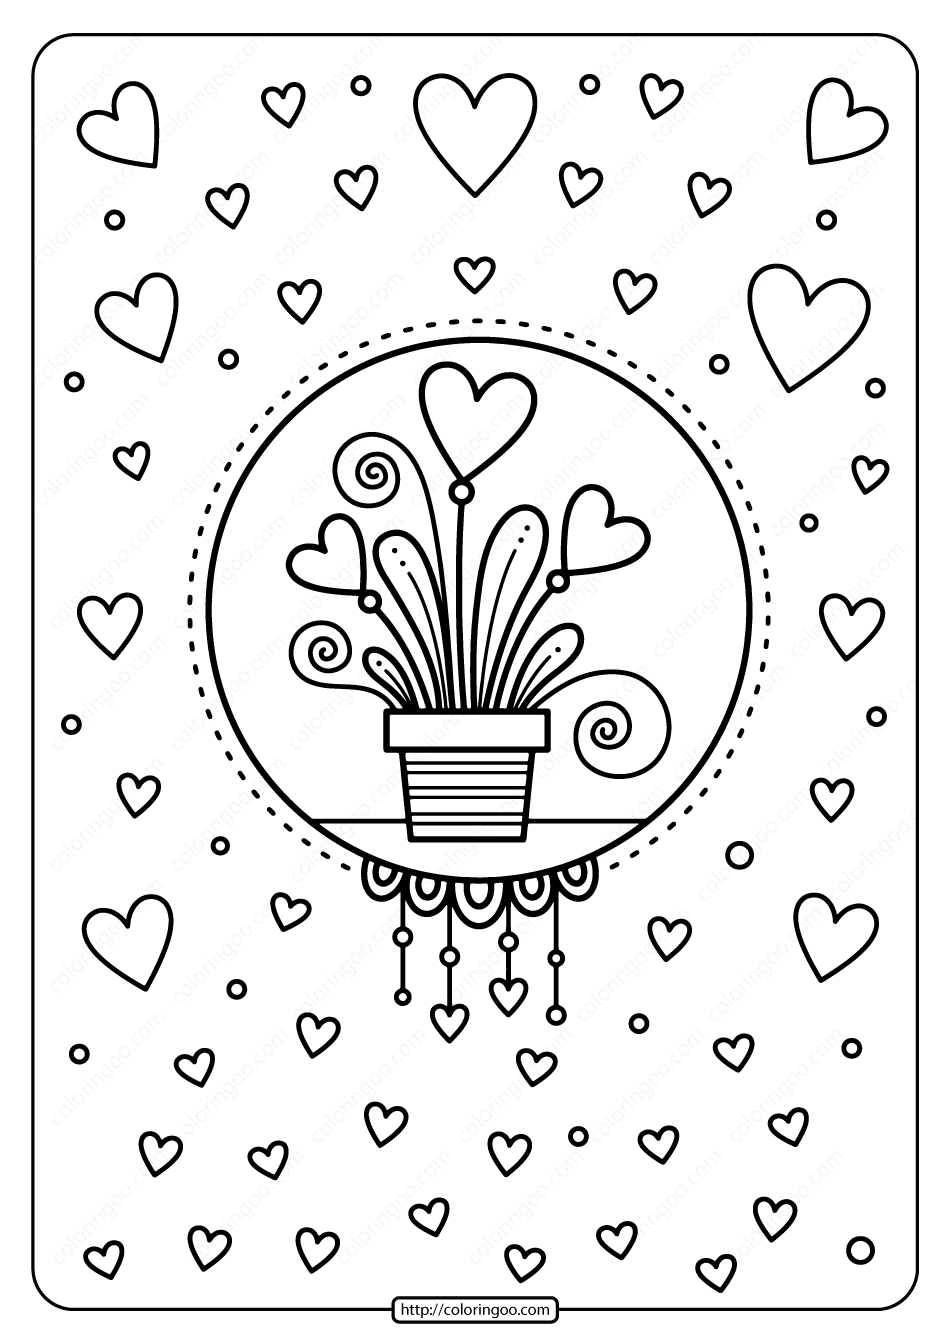 printable hearts in flower pot coloring page